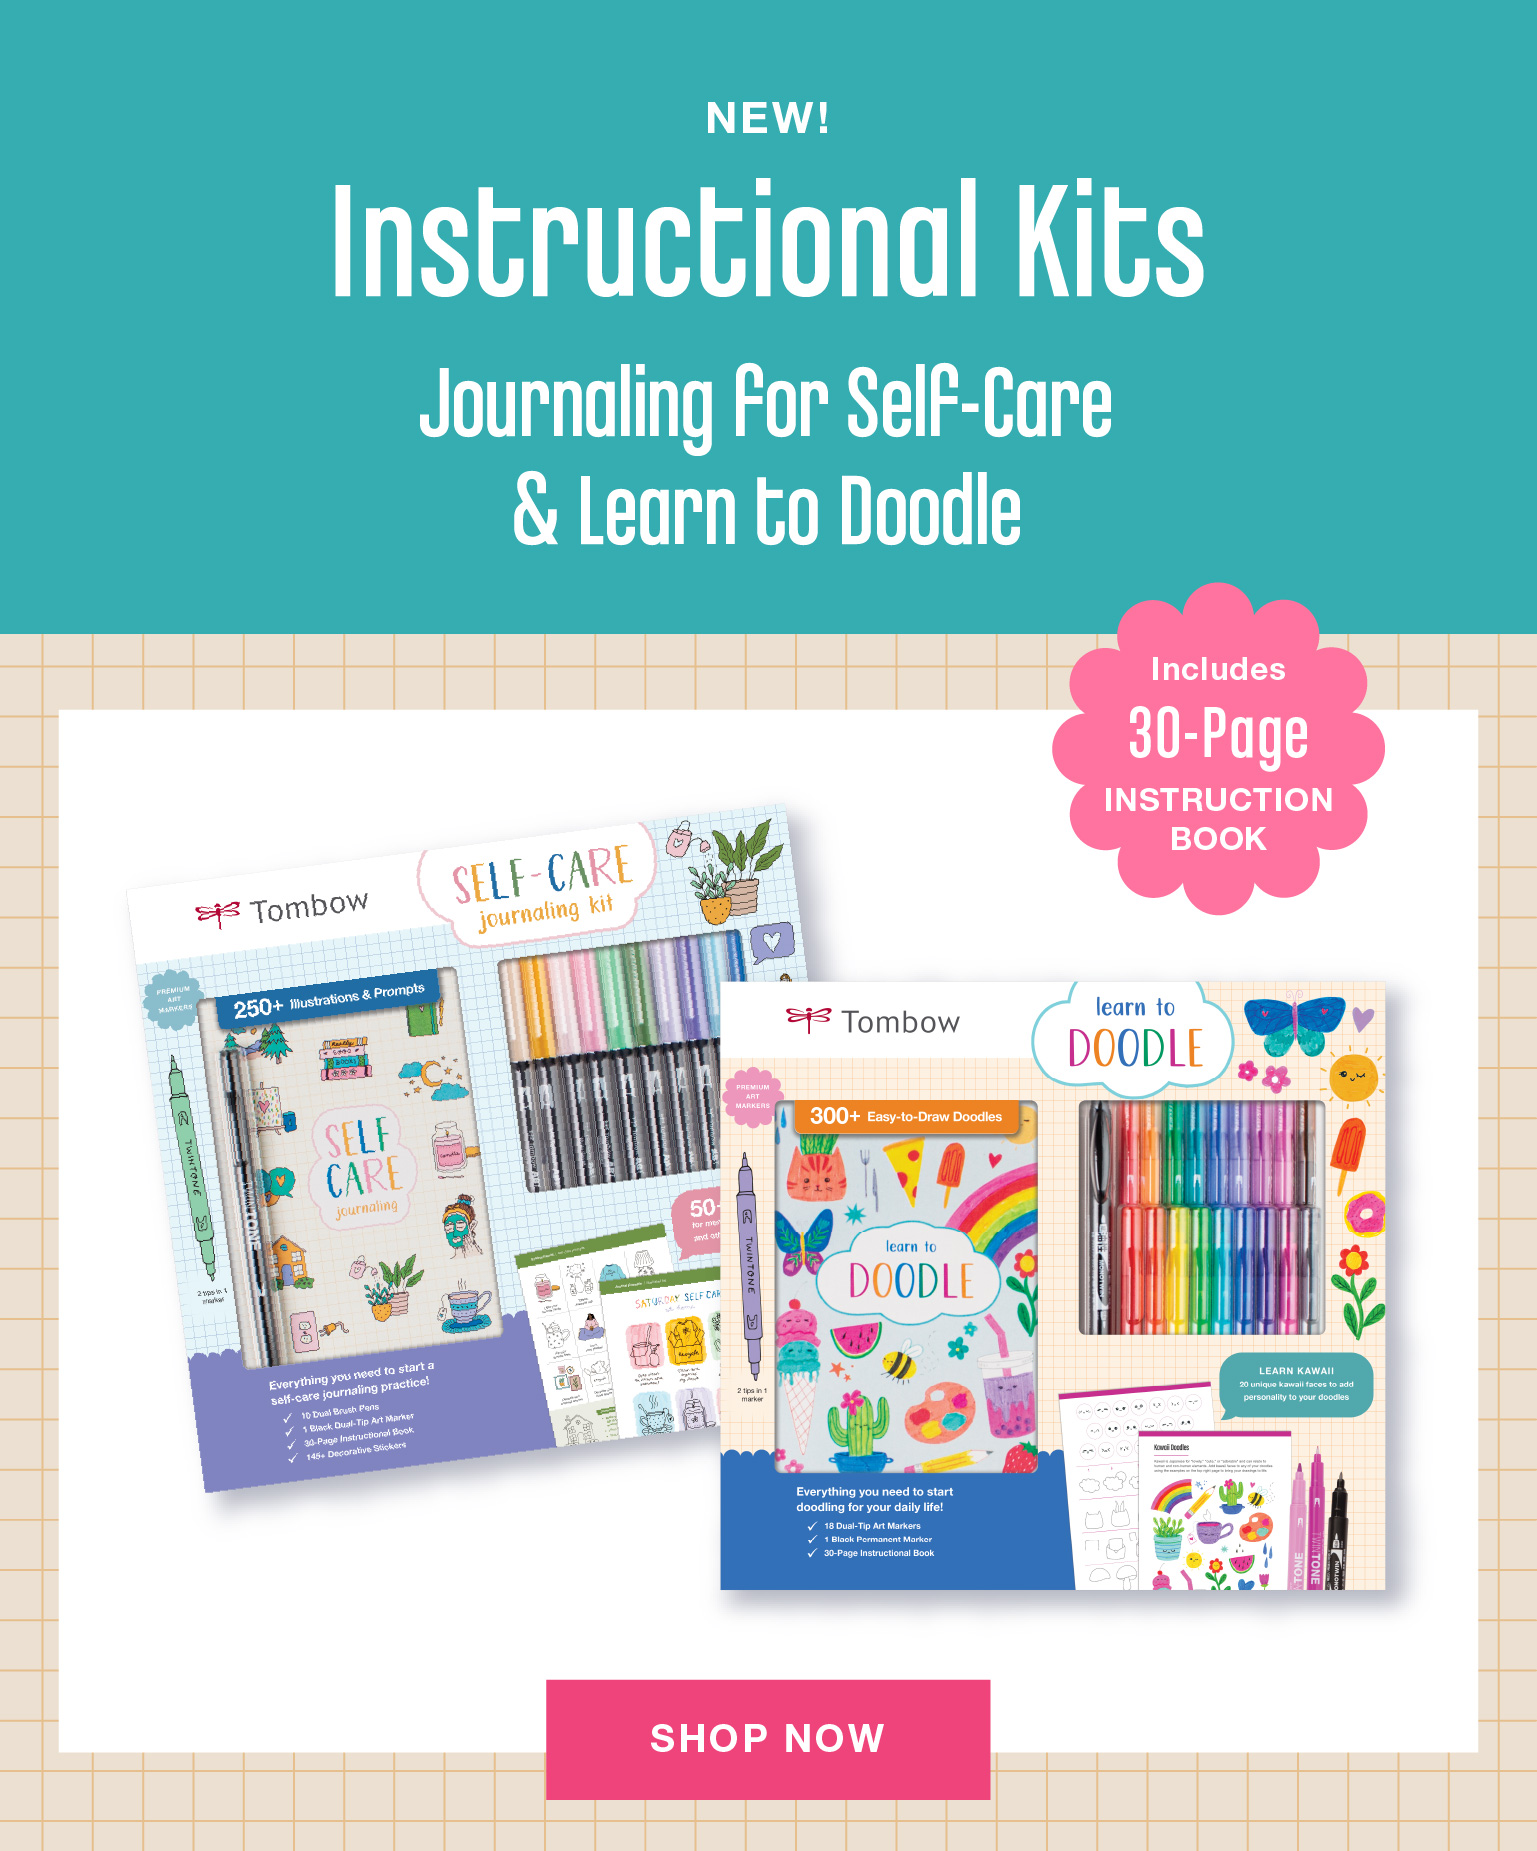 Click here to learn more about Tombow's exciting new instructional kits!